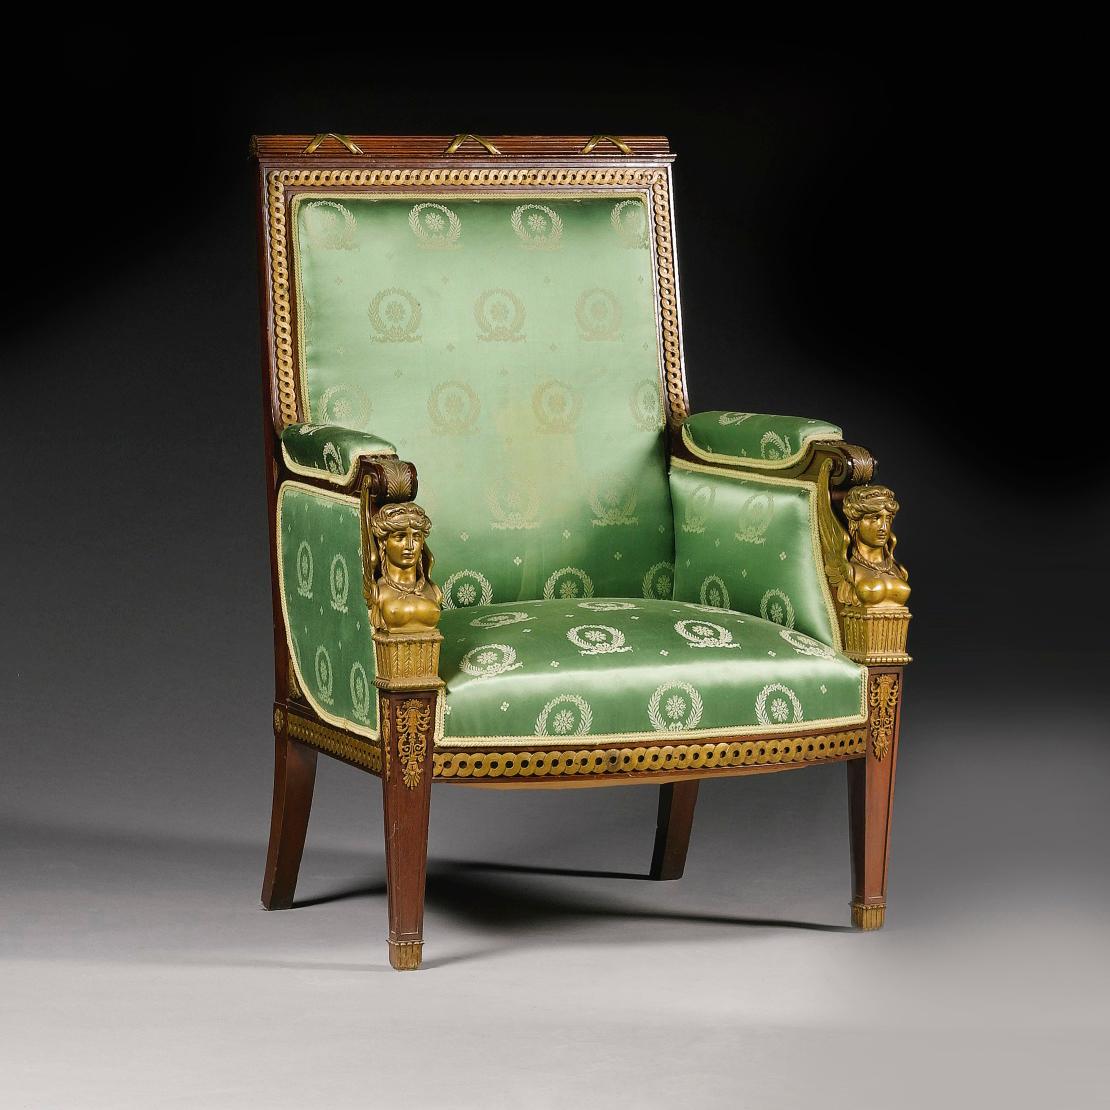 A Fine Pair of Mahogany And Gilt-Bronze Bergères in the Manner of Jacob-Desmalter. The Bergères each having armrests headed by finely cast caryatid herms.     

French, Circa 1880.
